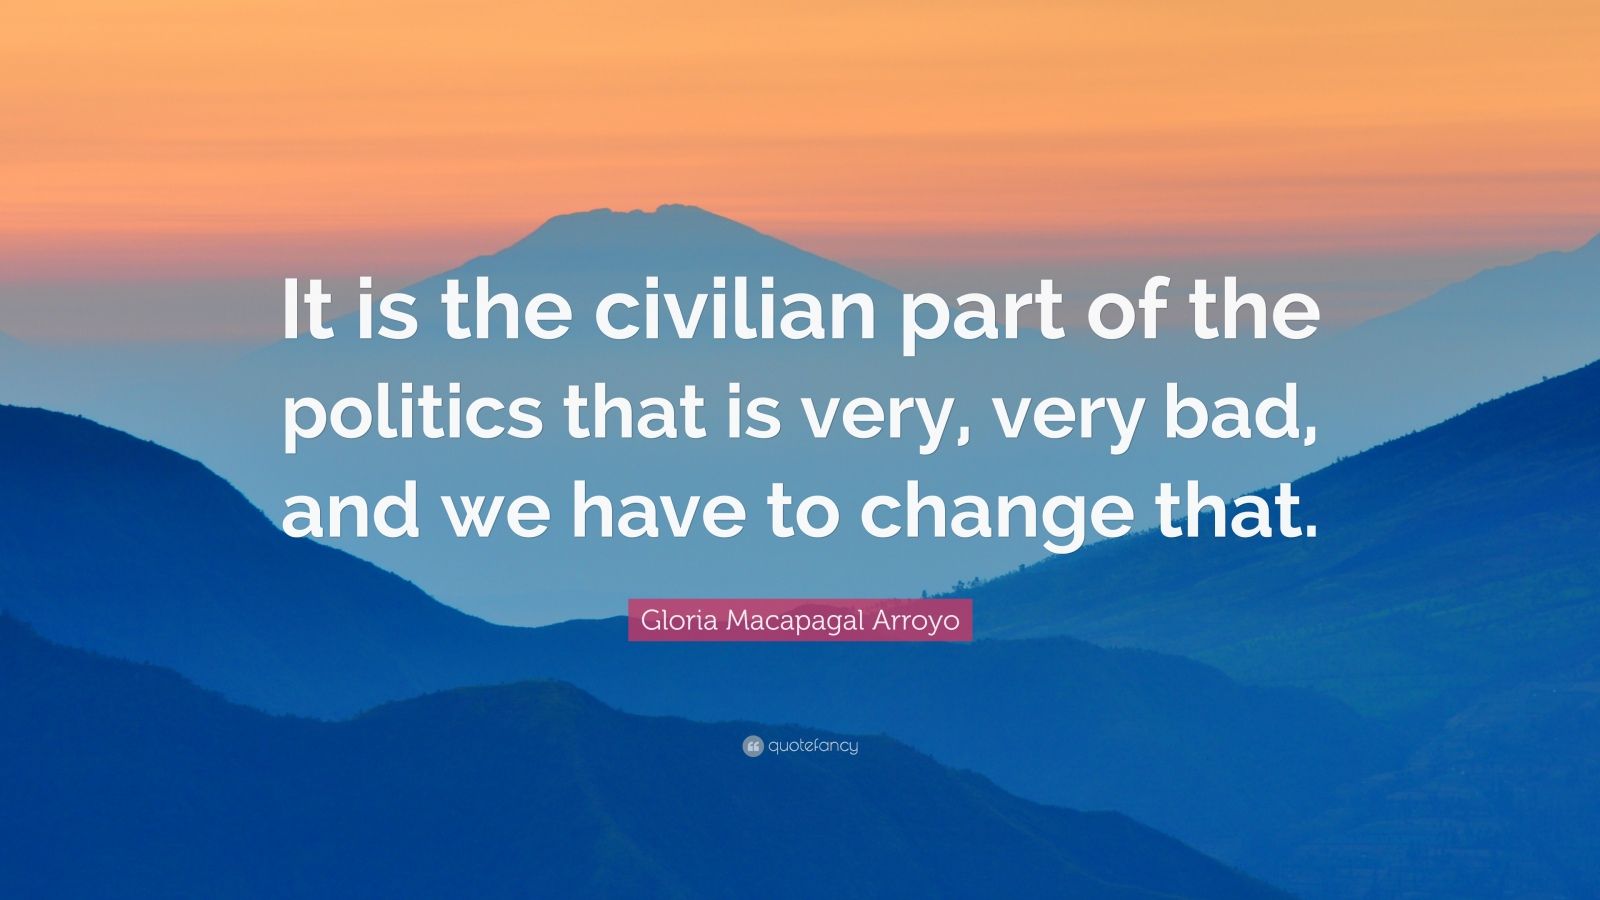 Gloria Macapagal Arroyo Quote: “It is the civilian part of the politics ...